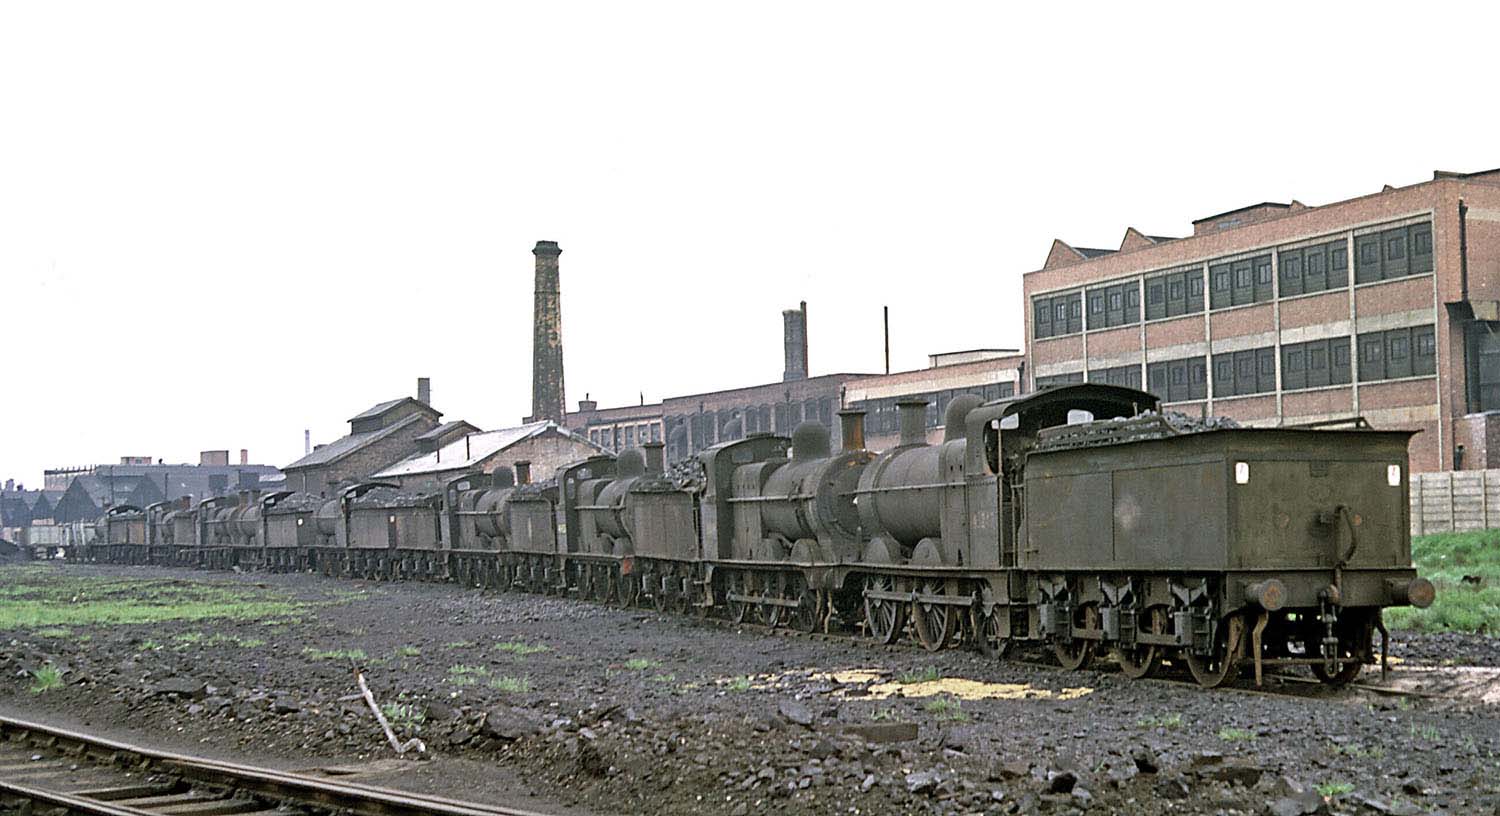 Ex MR 0-6-0 No 43242 together with eight sister locomotives, standing on what had been the Saltley coal roads